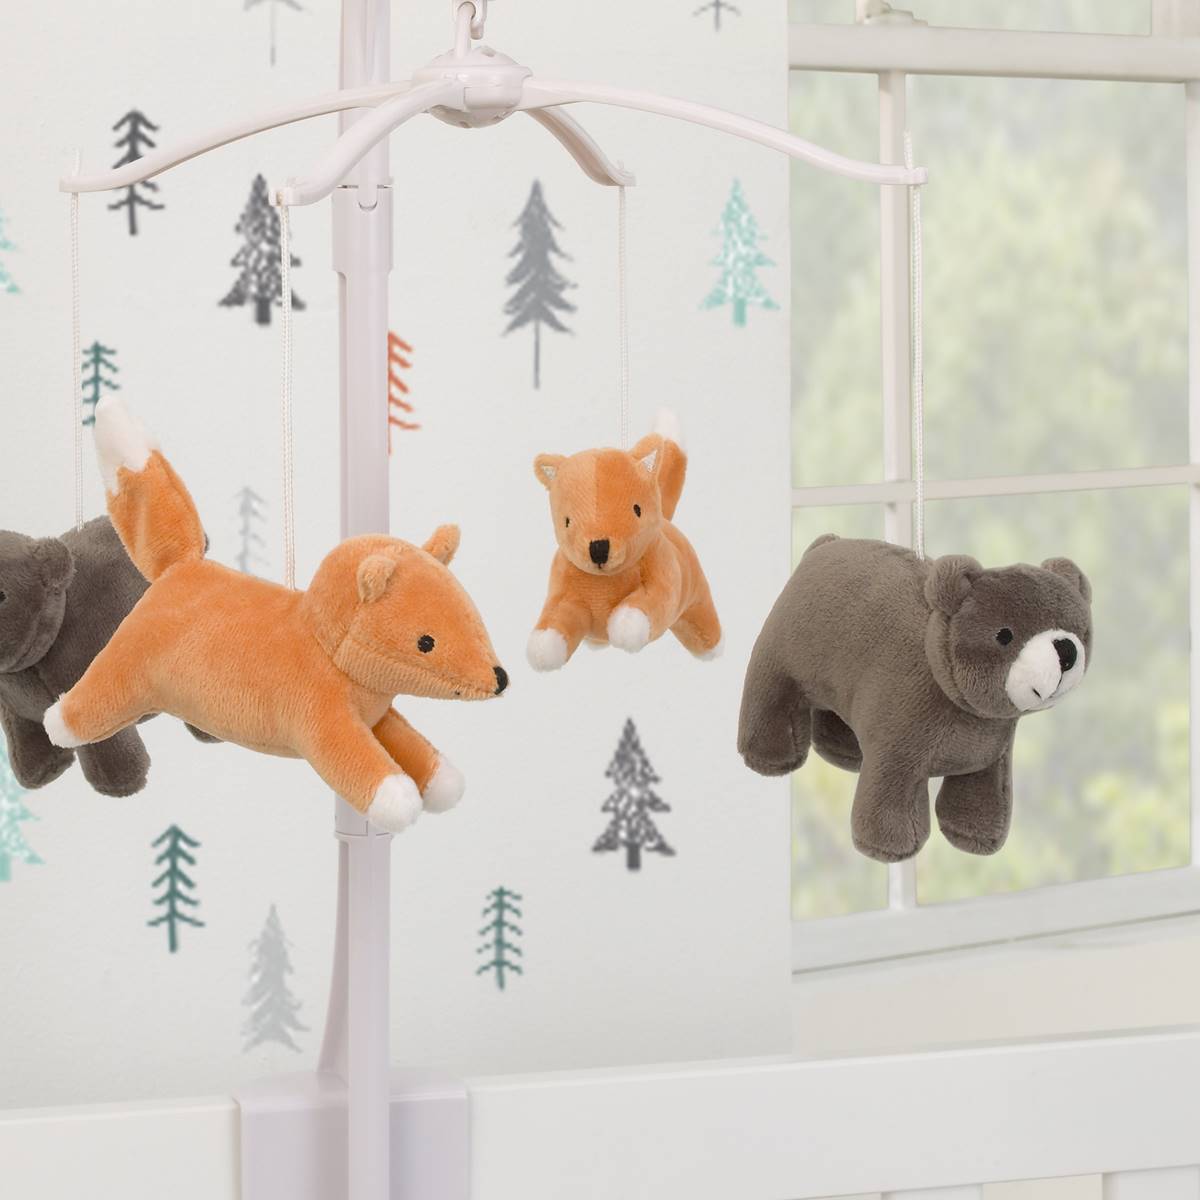 Carters(R) Woodland Friends Musical Mobile